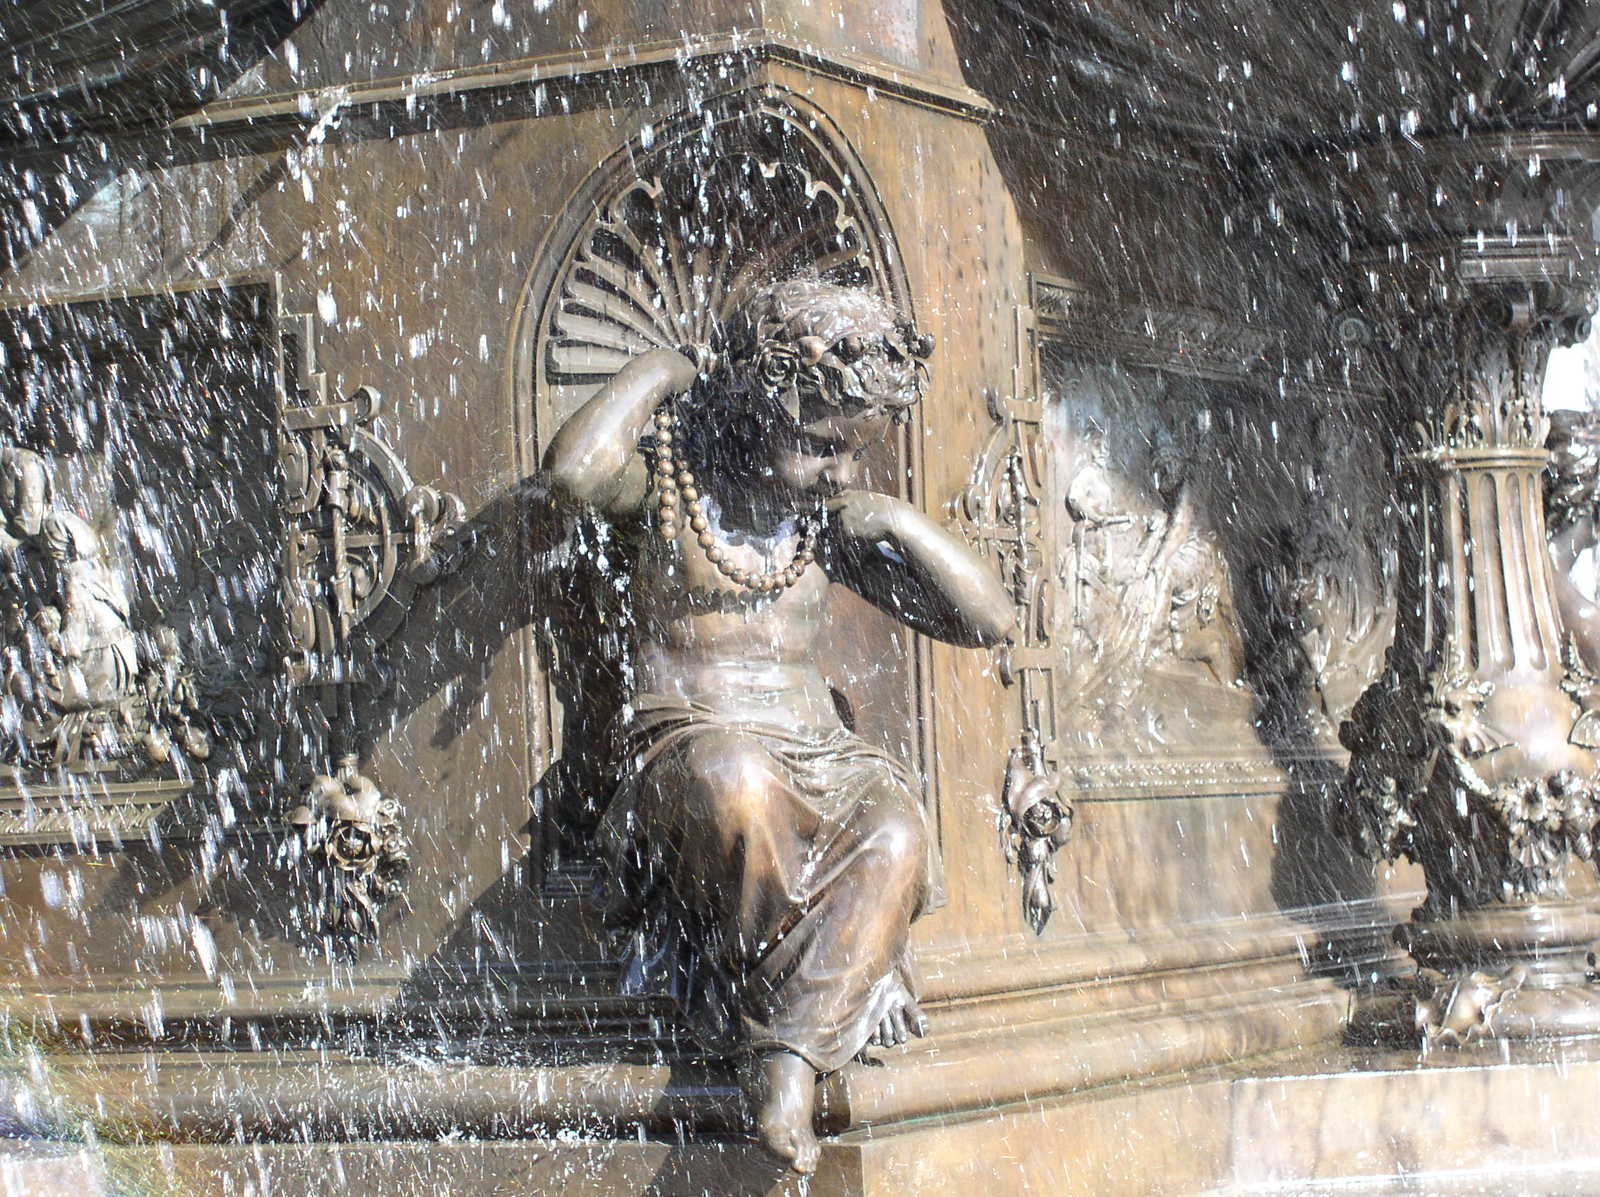 a fountain that has a statue in it